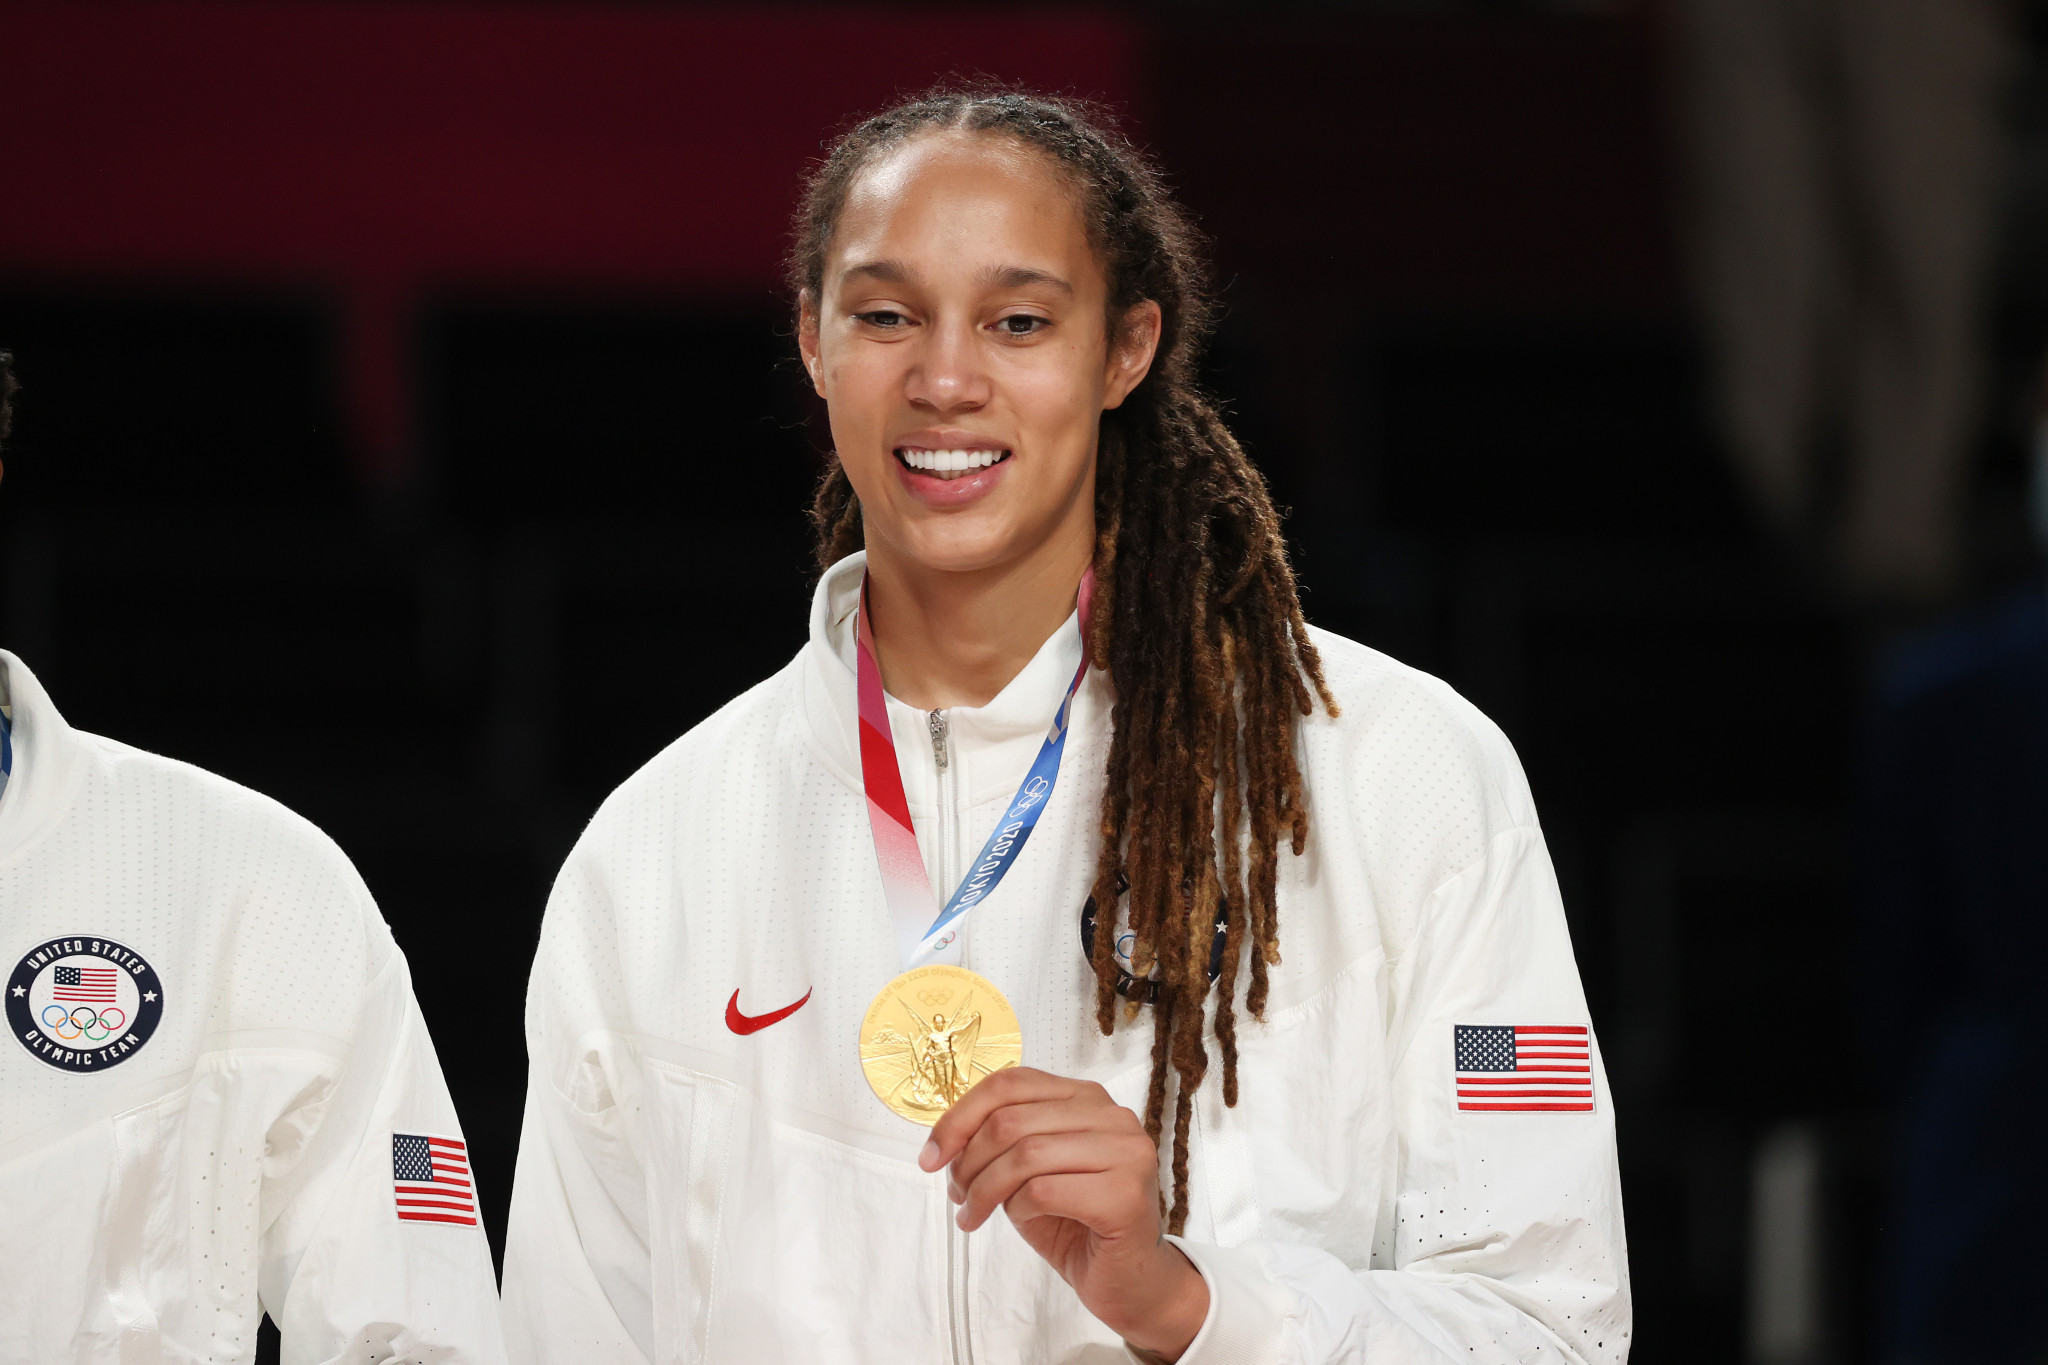 Brittney Griner won women's basketball gold medals at the Rio 2016 and Tokyo 2020 Olympics ©Getty Images